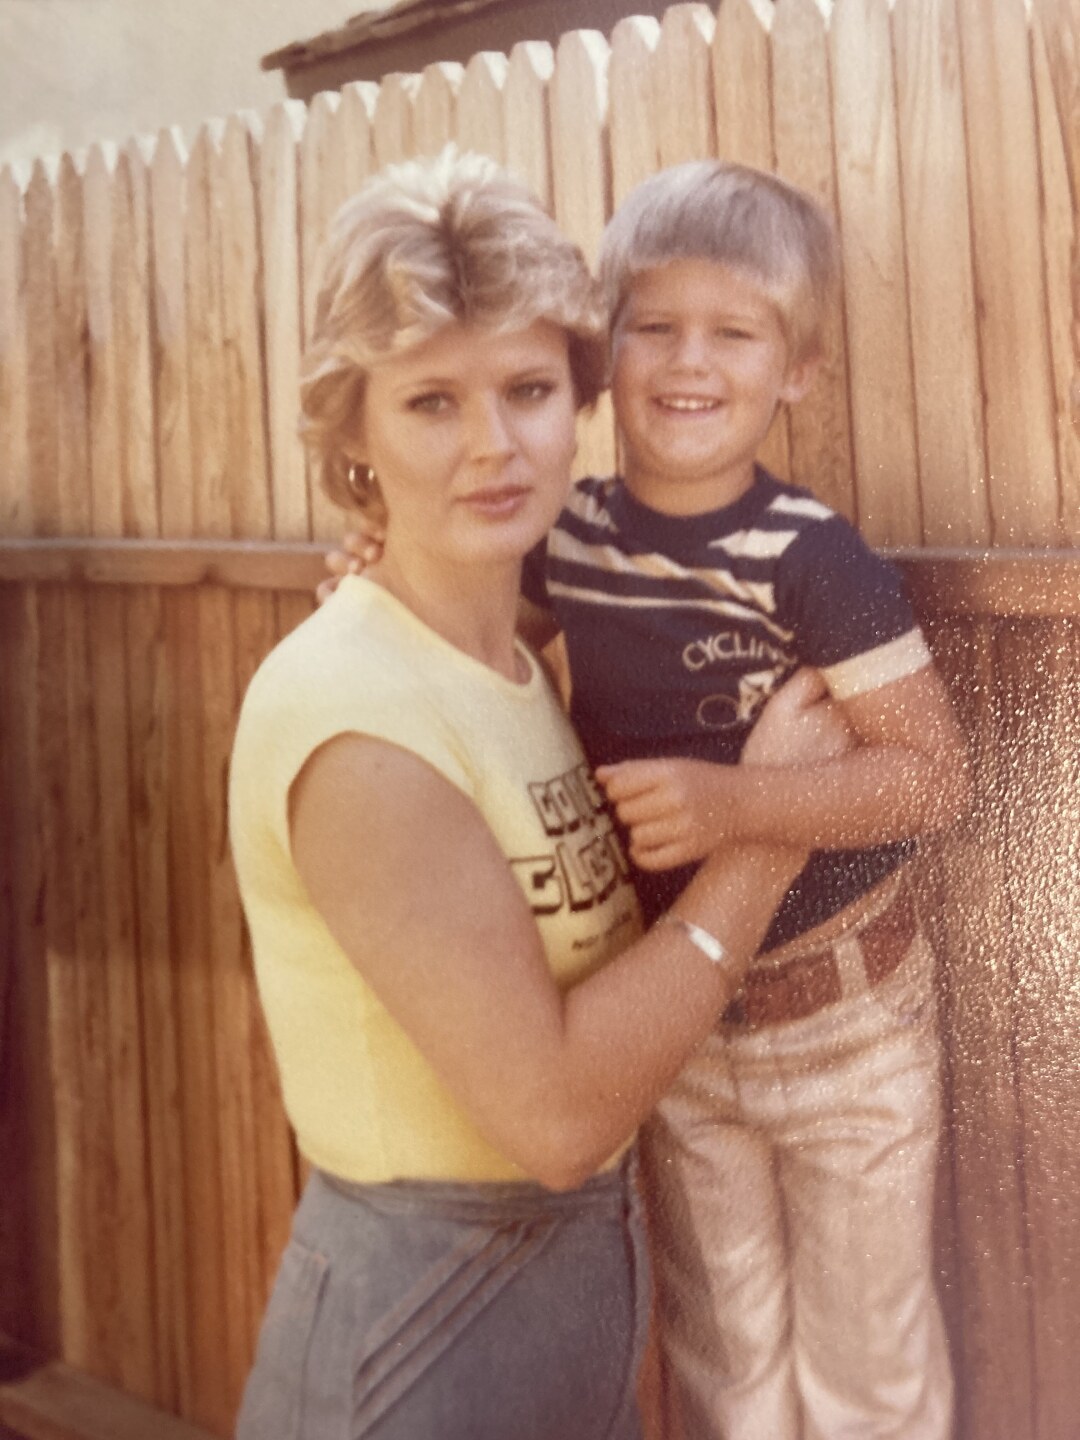 Cody, age 5, and his mother, Ingrid Solhaug, at their home in Bakersfield.